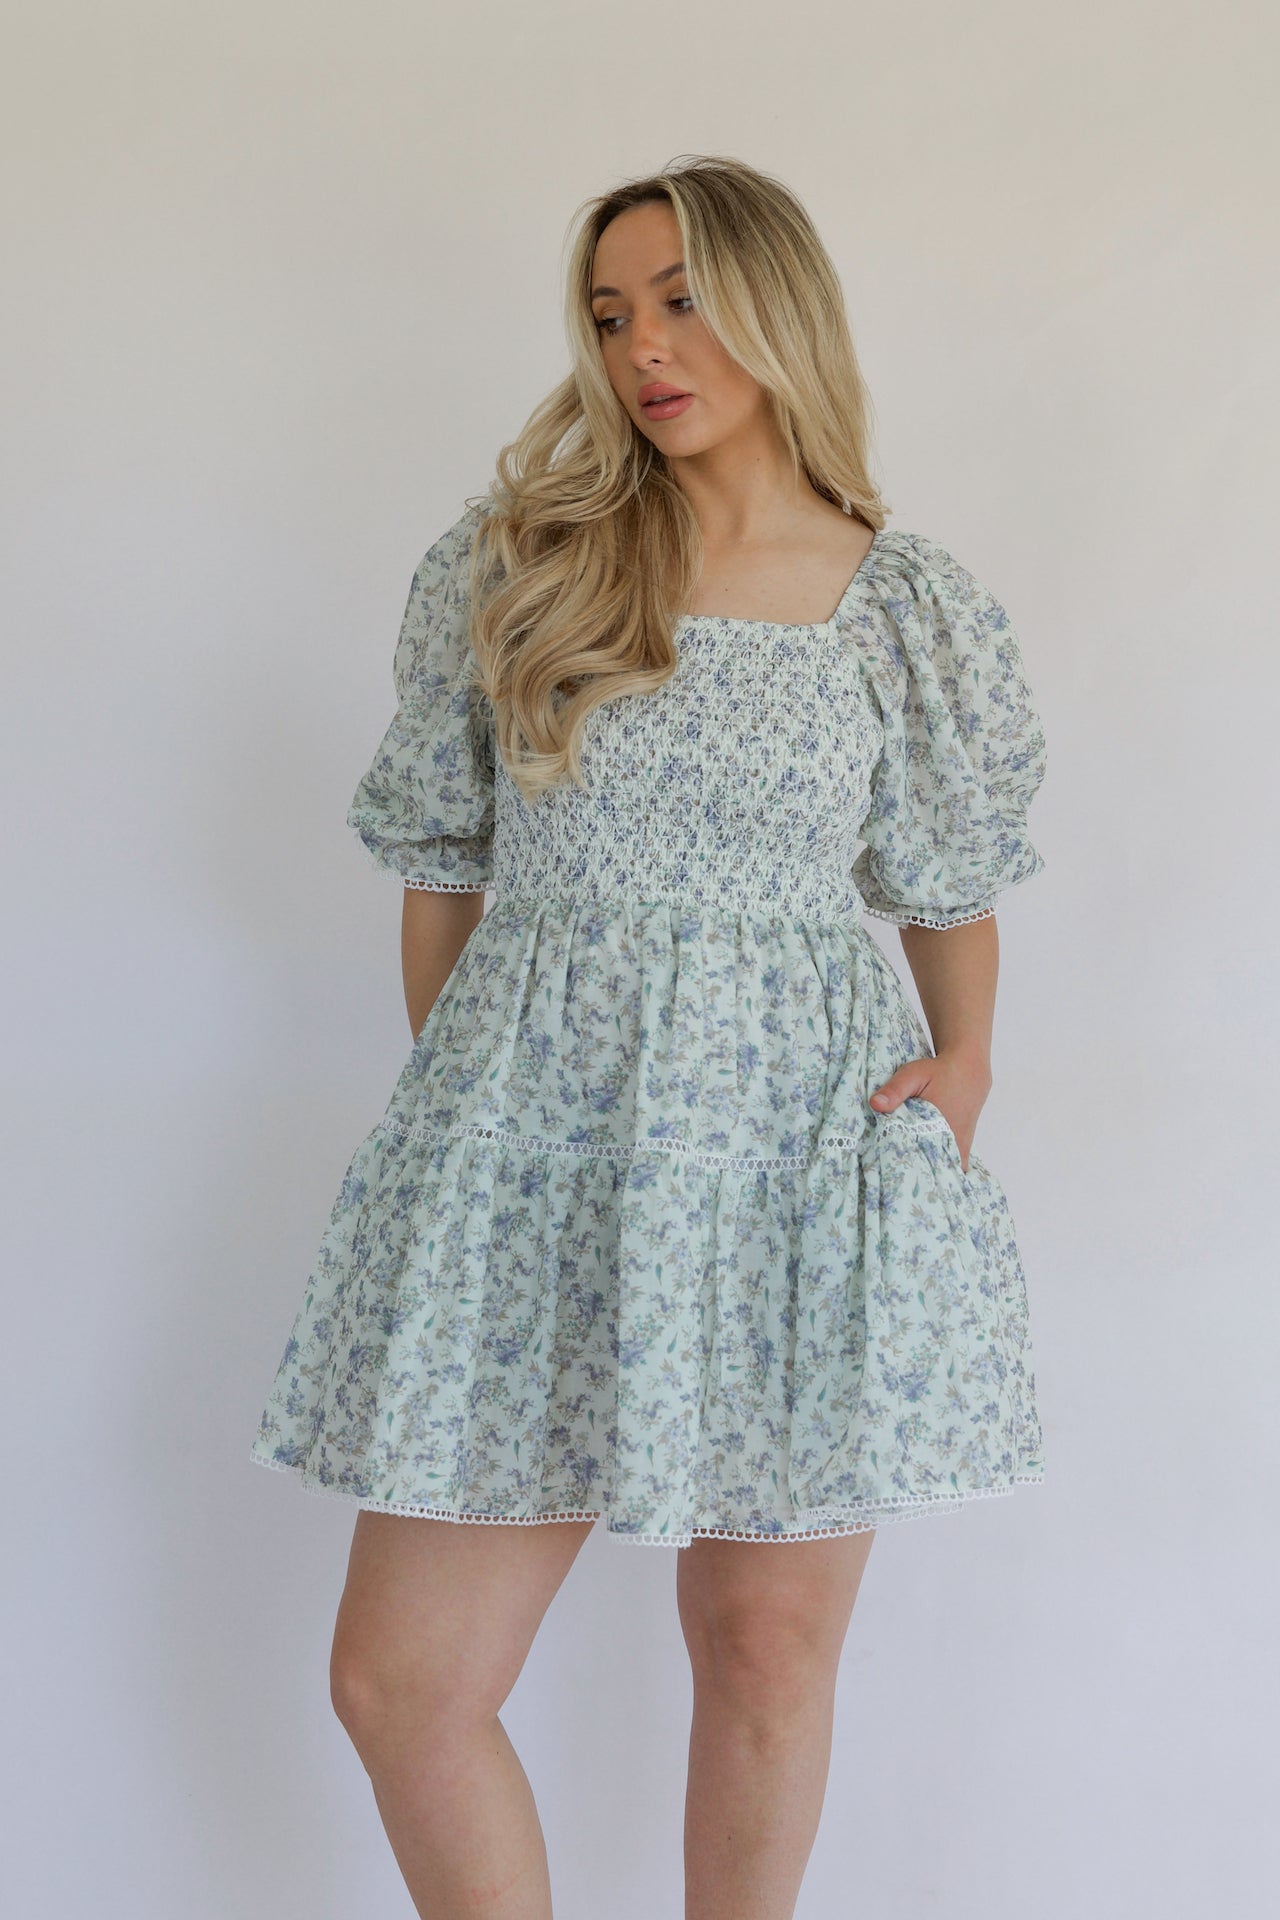 blue floral mini dress with puff sleeves, smocked bodice, tiered, and crochet lace trim